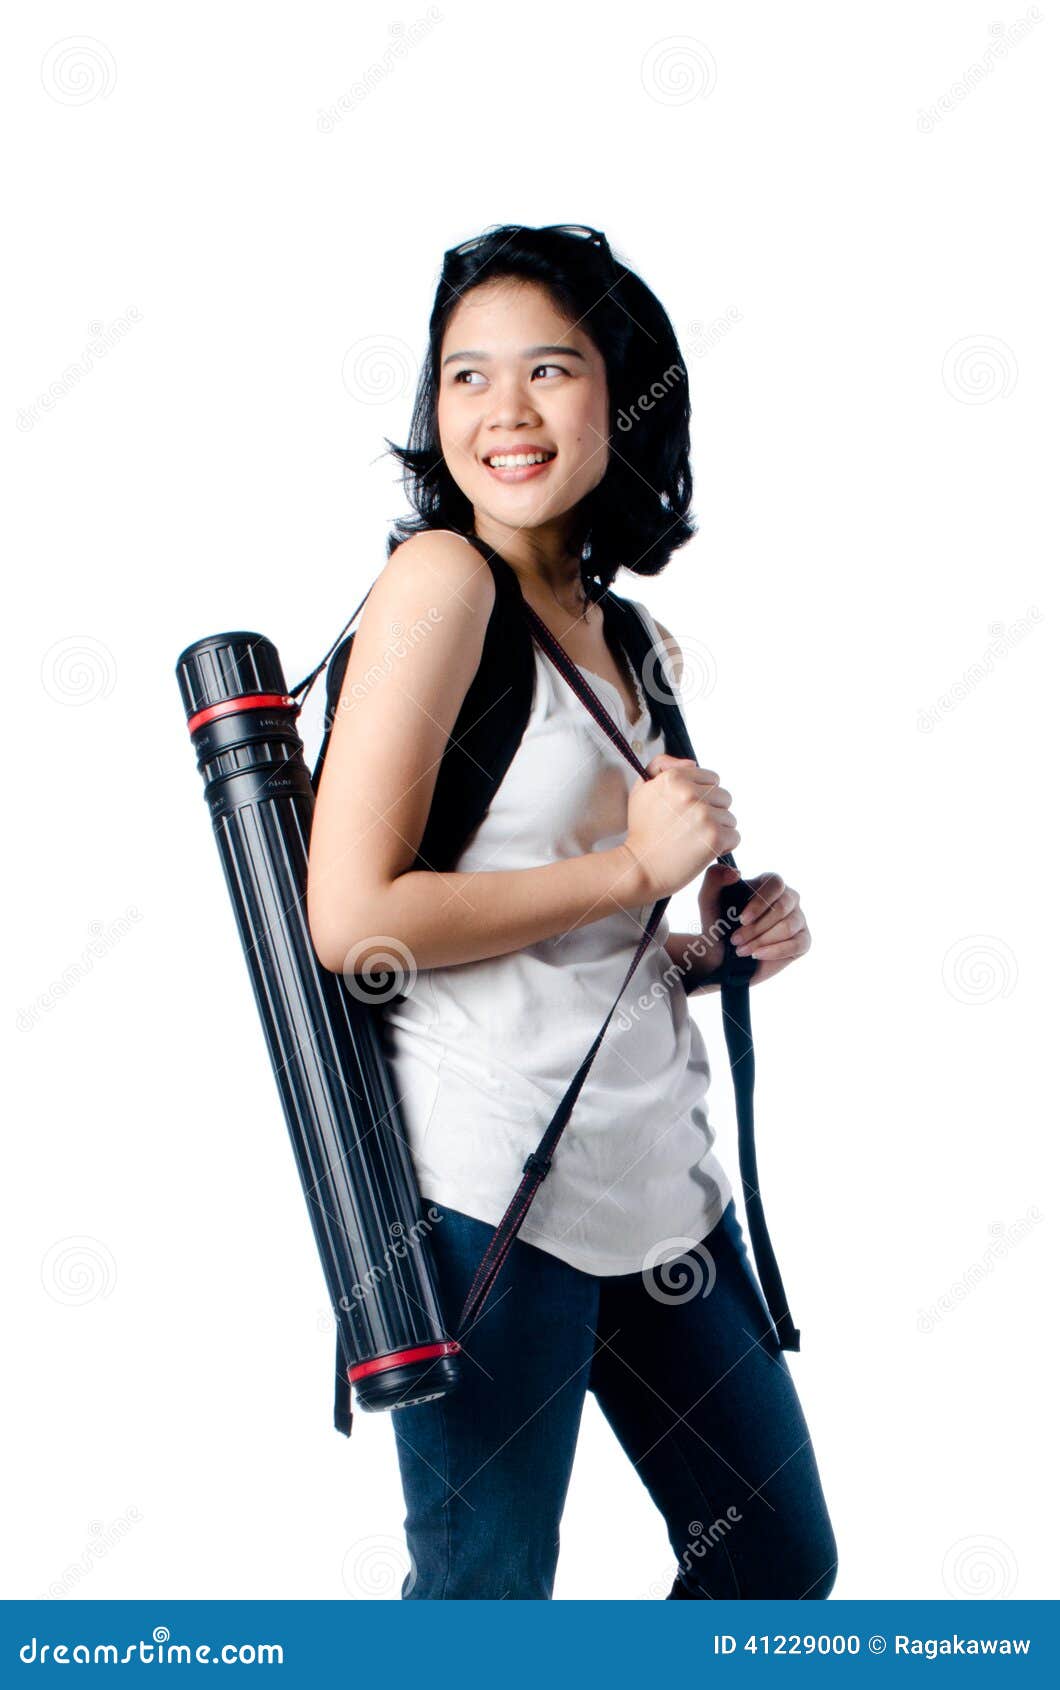 Smart and Beauty College Girl with Blueprint Tube Carrier Stock Photo -  Image of lifestyle, carrier: 41229000